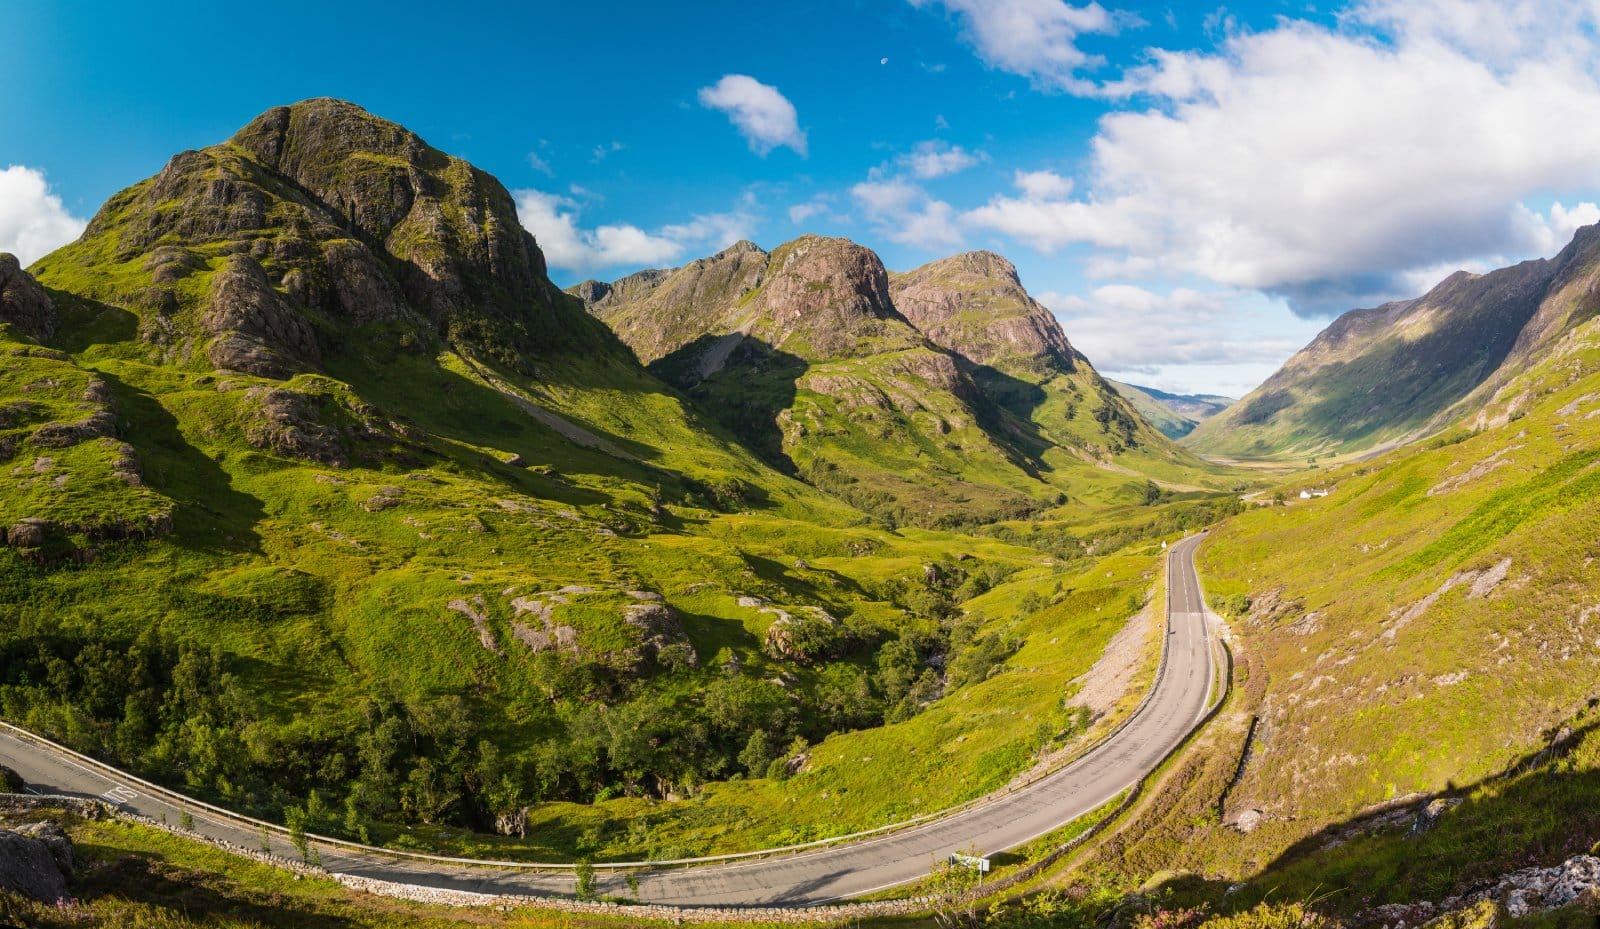 Image Credit: Shutterstock / orxy <p>Glen Coe is famed for its dramatic landscapes and tumultuous history. While it’s a hiker’s paradise, unpredictable Scottish weather can turn a walk into a waterlogged ordeal.</p>